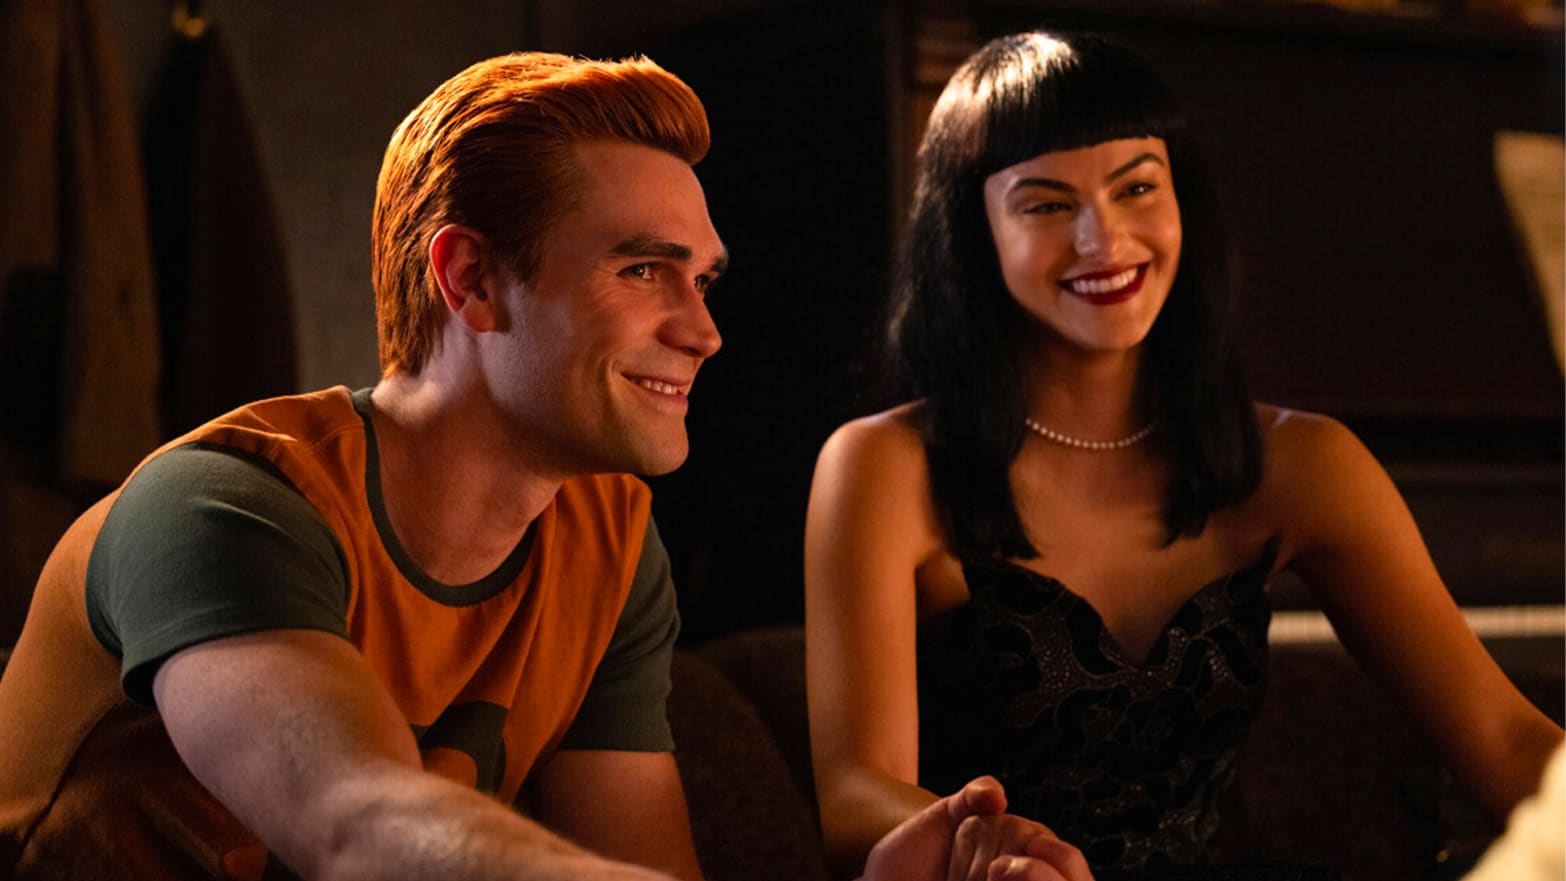 KJ Apa as Archie Andrews and Camila Mendes as Veronica Lodge in Riverdale.